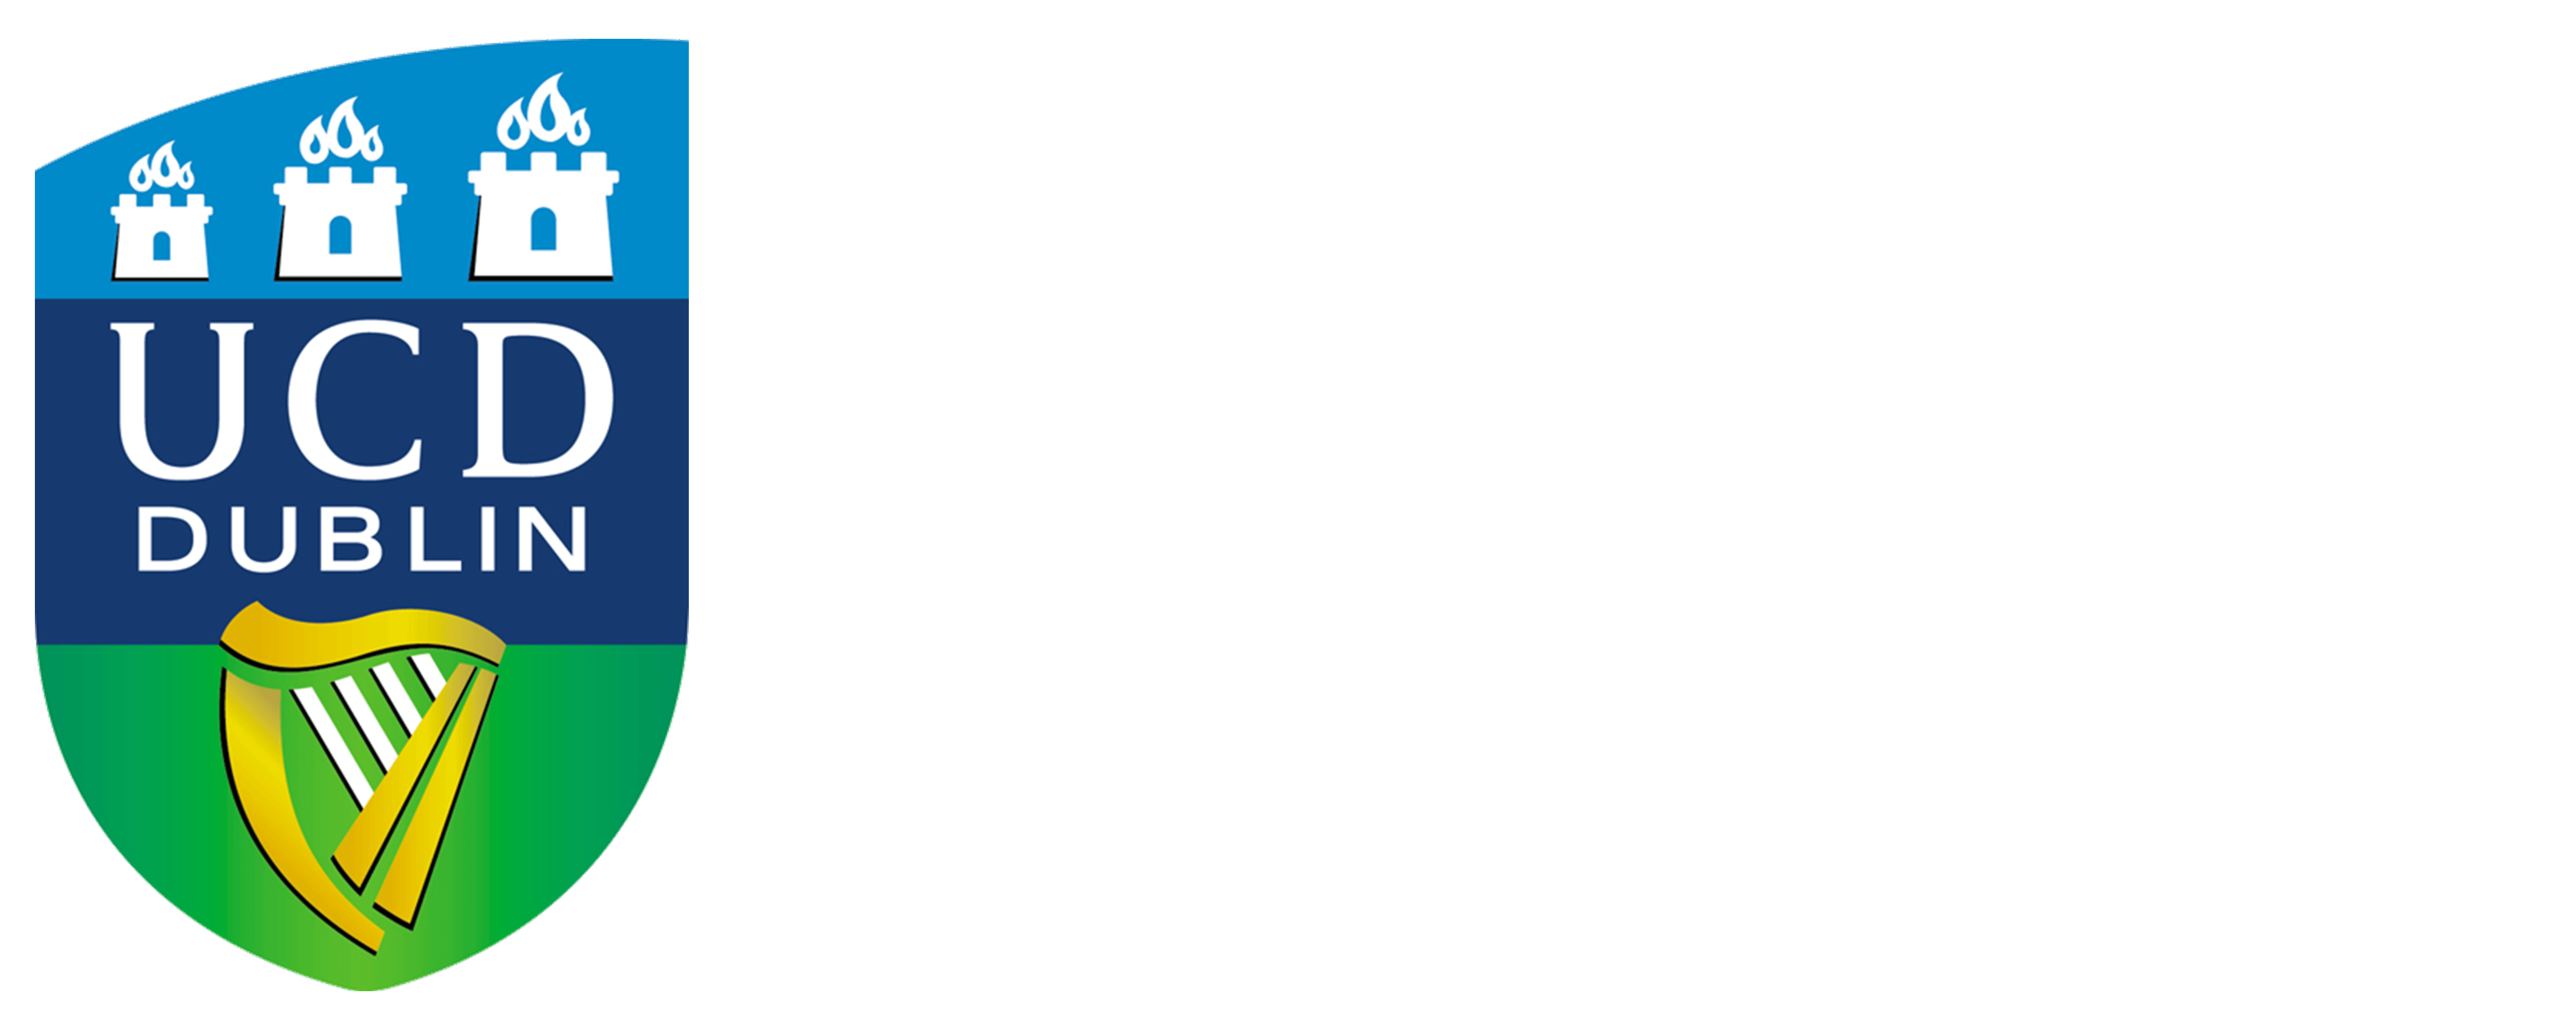 UCD Logo - Images and logos | UCD Smurfit School